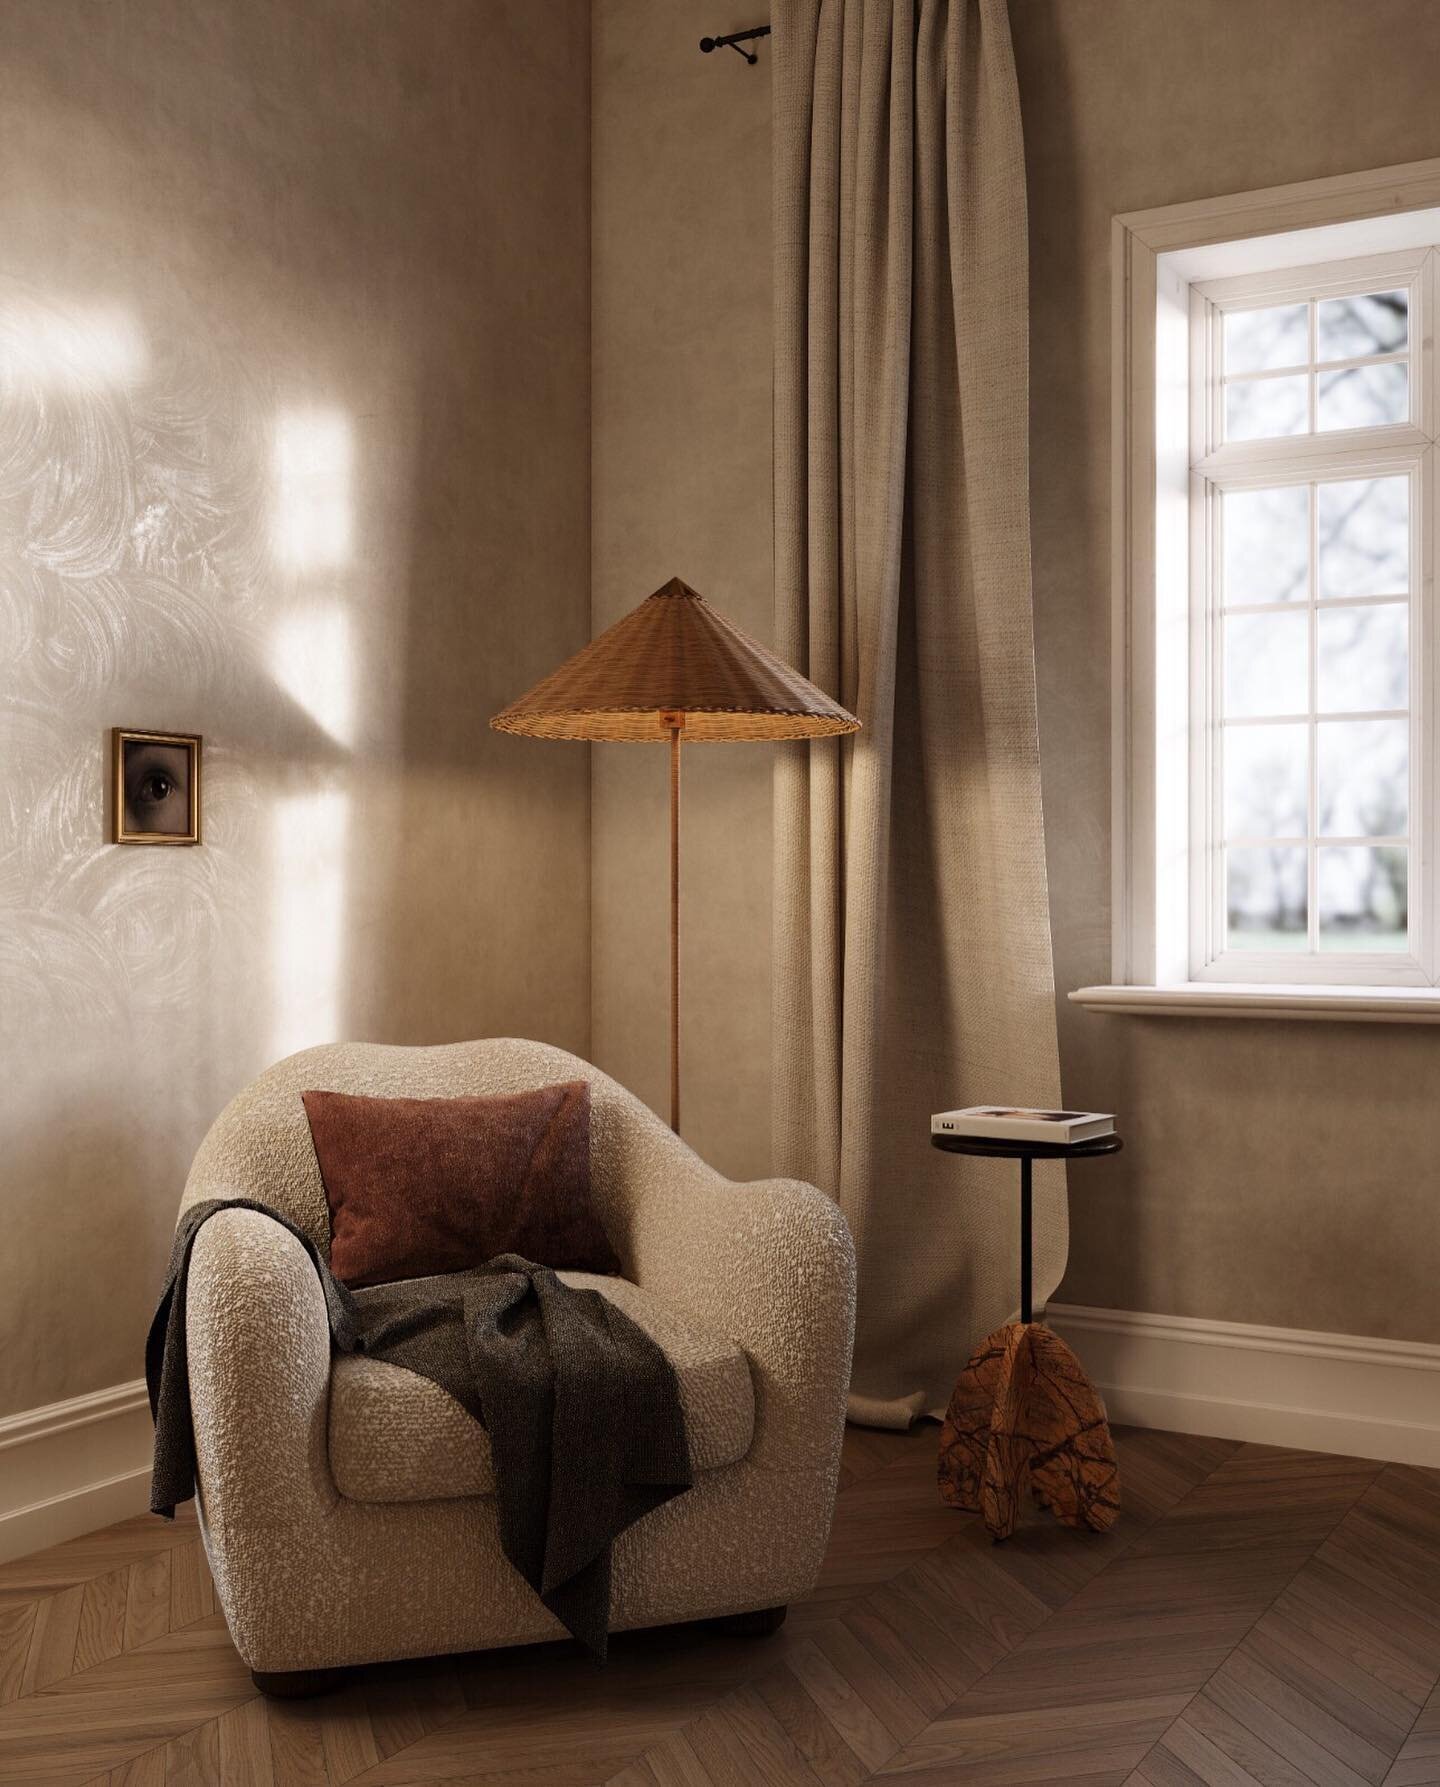 A bedroom reading corner we developed for one of our latest online consultancy projects.

Featuring Gubi&rsquo;s 9602 floor lamp and this precious art piece by @alain_urrutia. You can see his pieces currently exhibited in Galeria Pelaires.
.
.
.
#ina